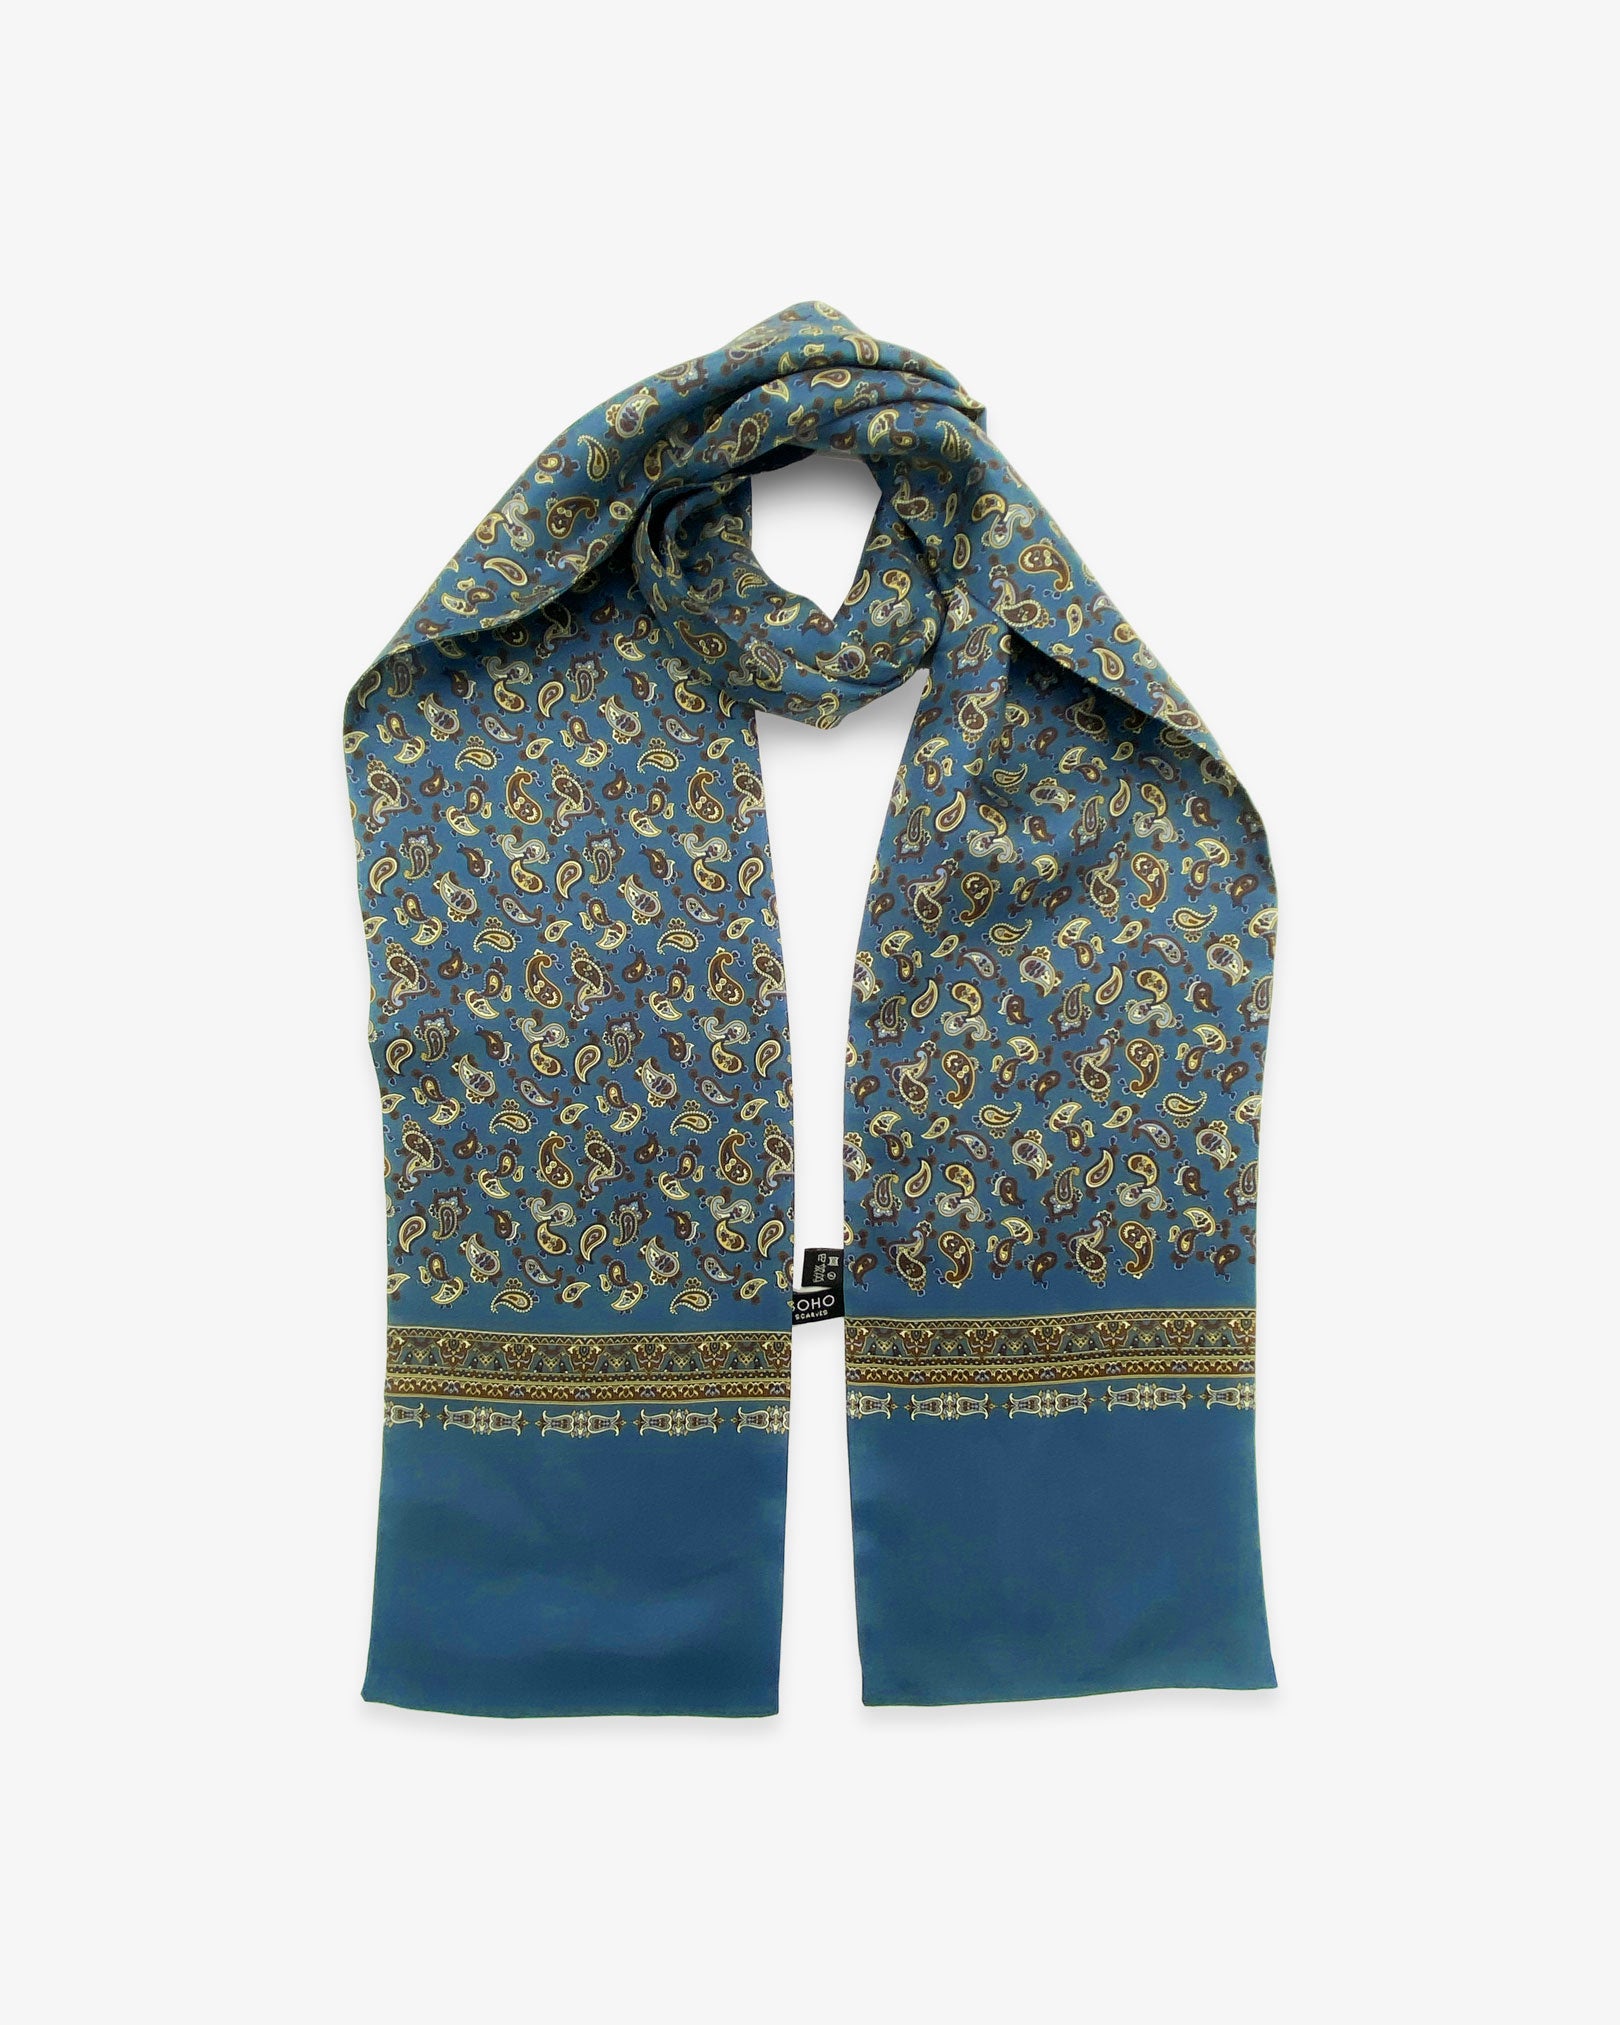 The Banff pure silk paisley scarf looped in middle with both ends parallel showing the paisley pure silk scarf on a peacock blue background. Clearly showing the blue, black and lemon yellow paisley patterns and the ornate, decorative border.